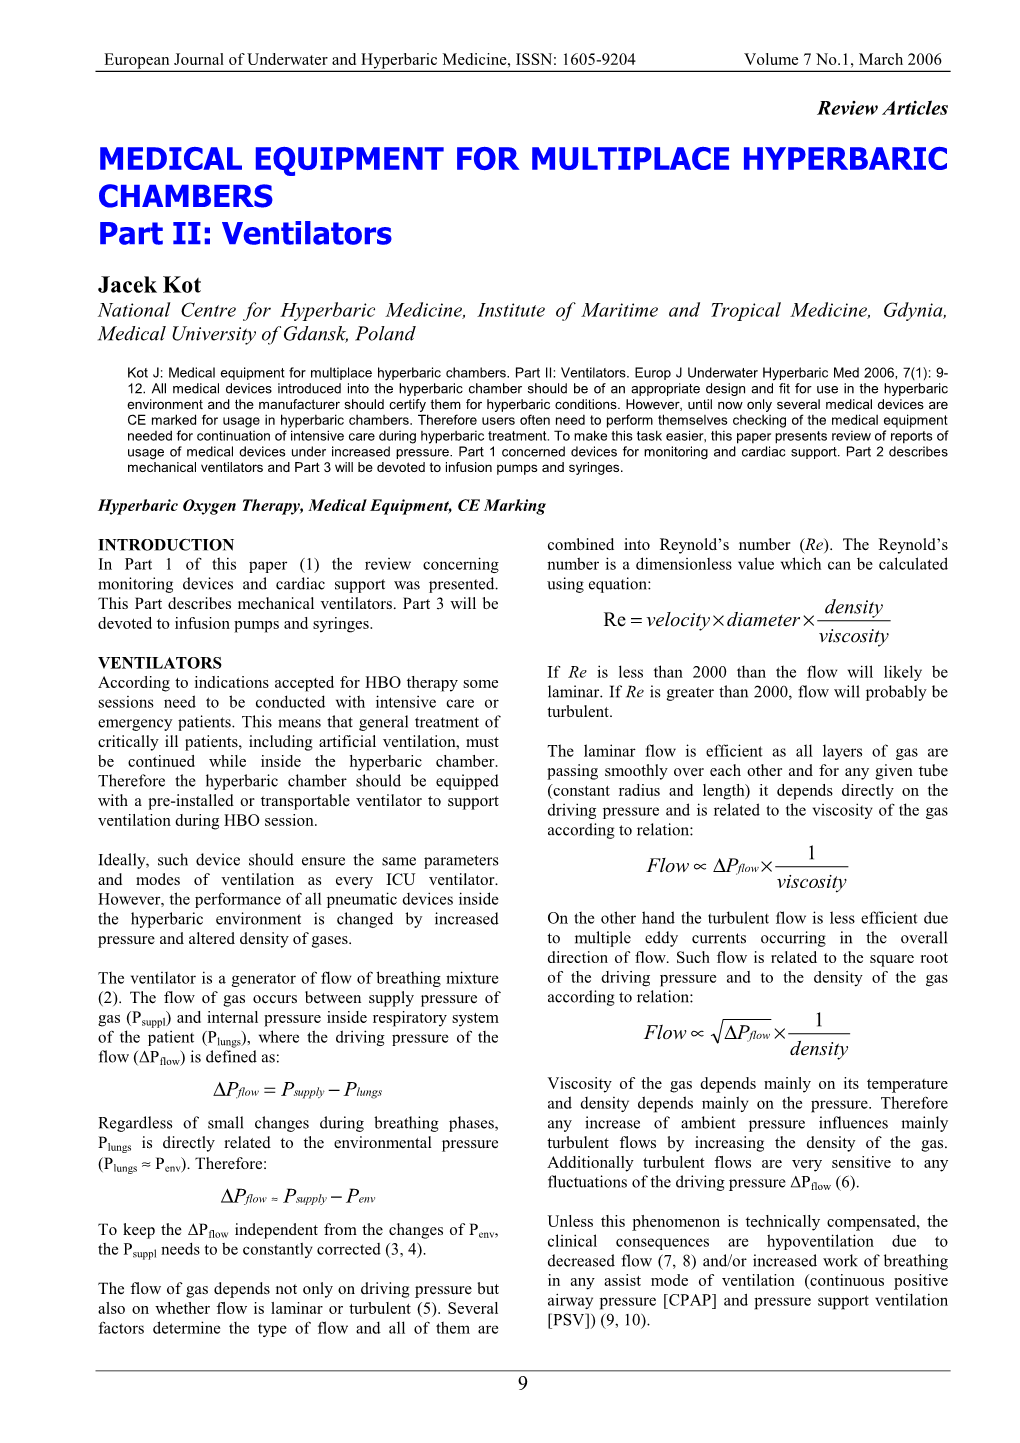 MEDICAL EQUIPMENT for MULTIPLACE HYPERBARIC CHAMBERS Part II: Ventilators